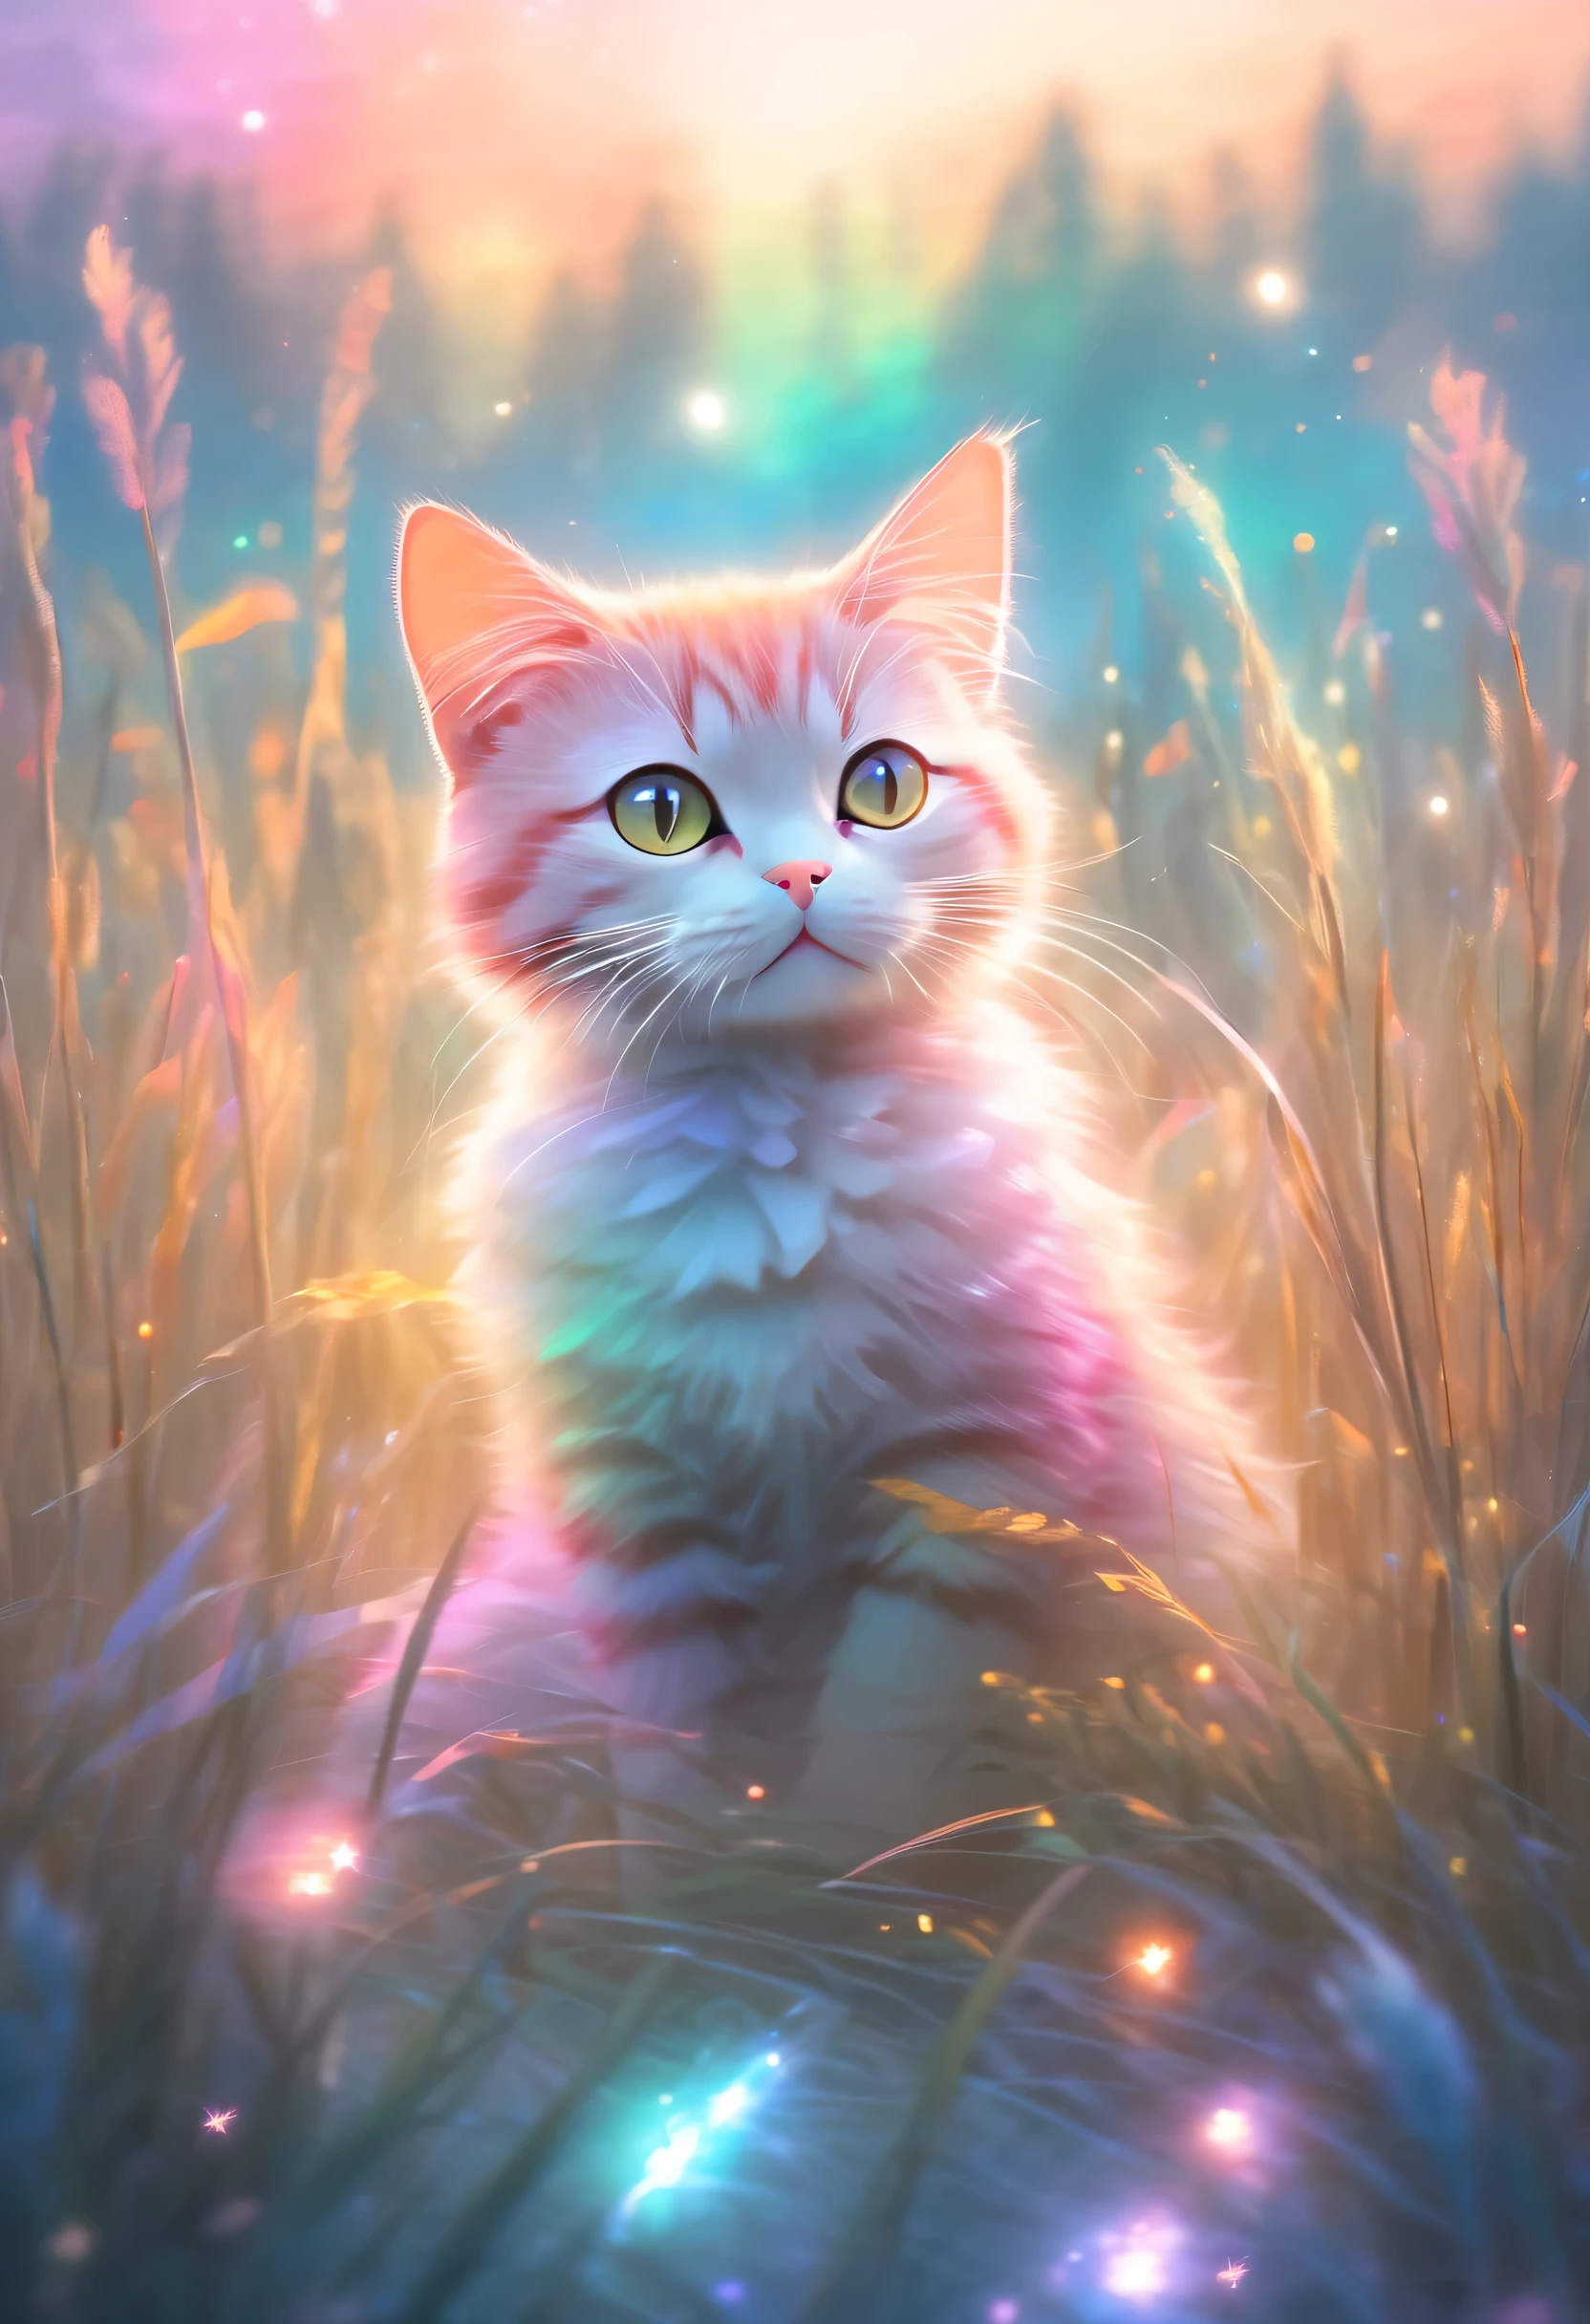 Colorful、brightly lit sky，A cat sitting in a field surrounded by tall grass, pastel painting style, Ethereal light effects, Light atmospheric woodland image,Star Art Troupe (xing xing)